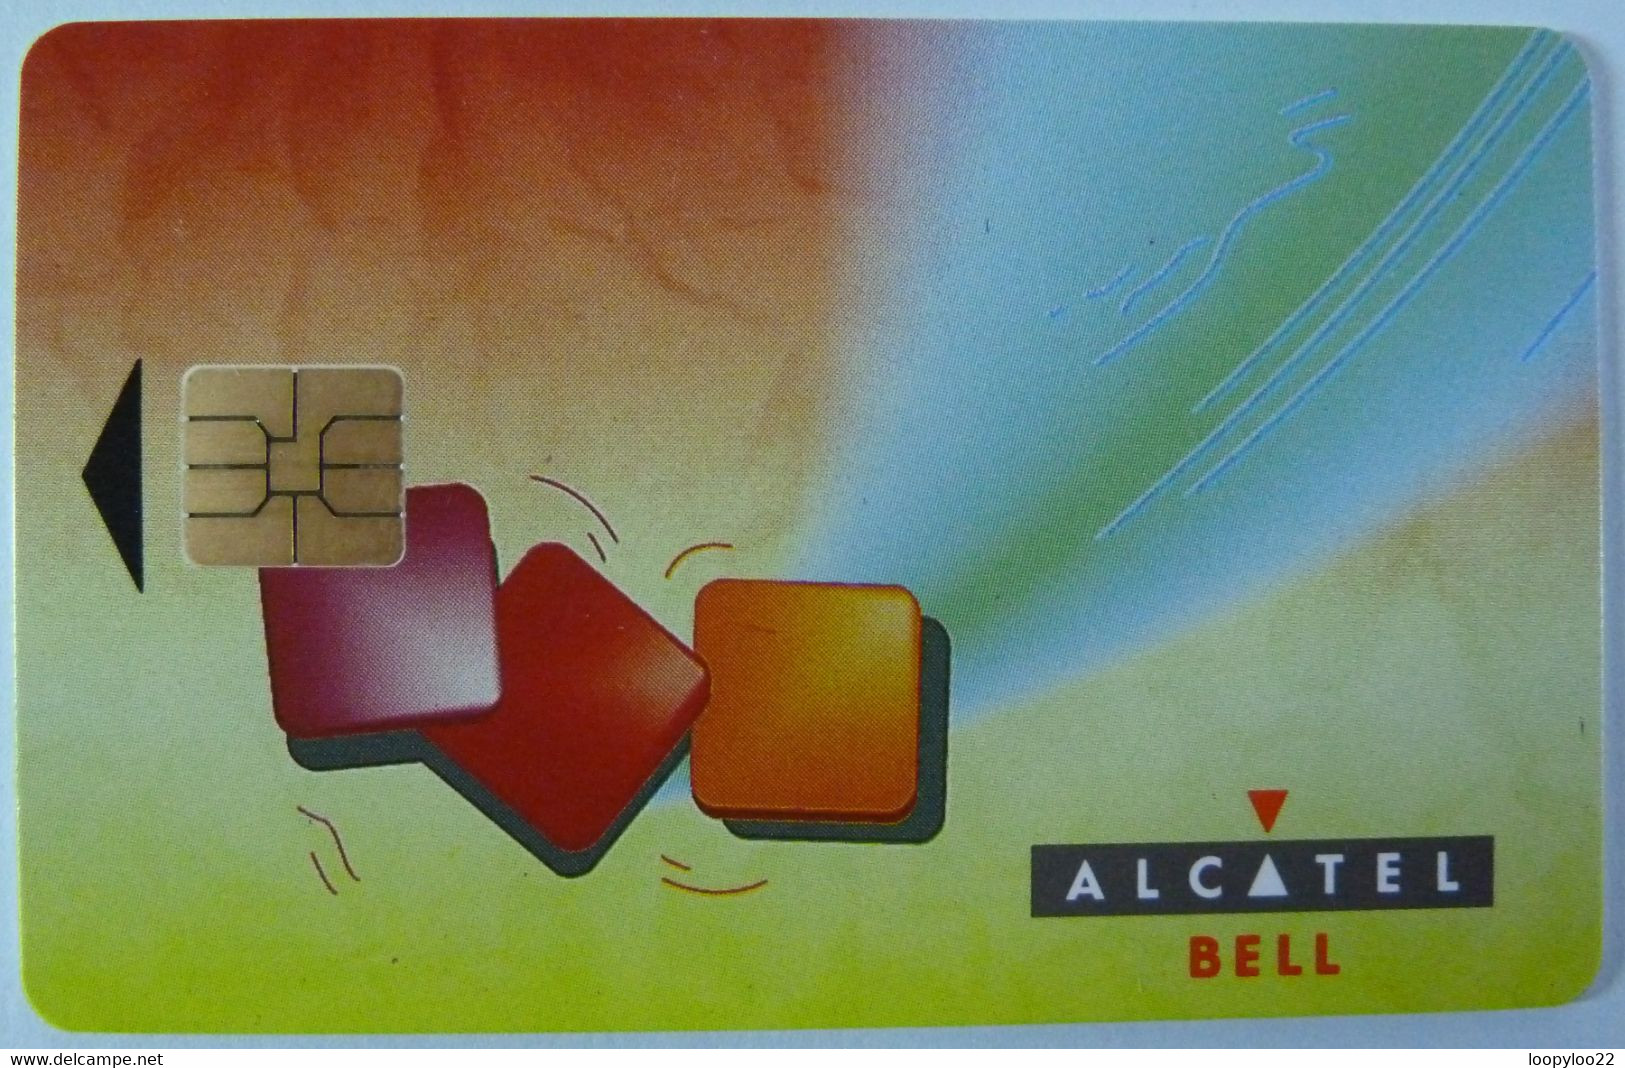 BELGIUM - Alcatel - Bell - Chip - Smart Card Demo - First Trial Issue - Mint - [3] Tests & Services